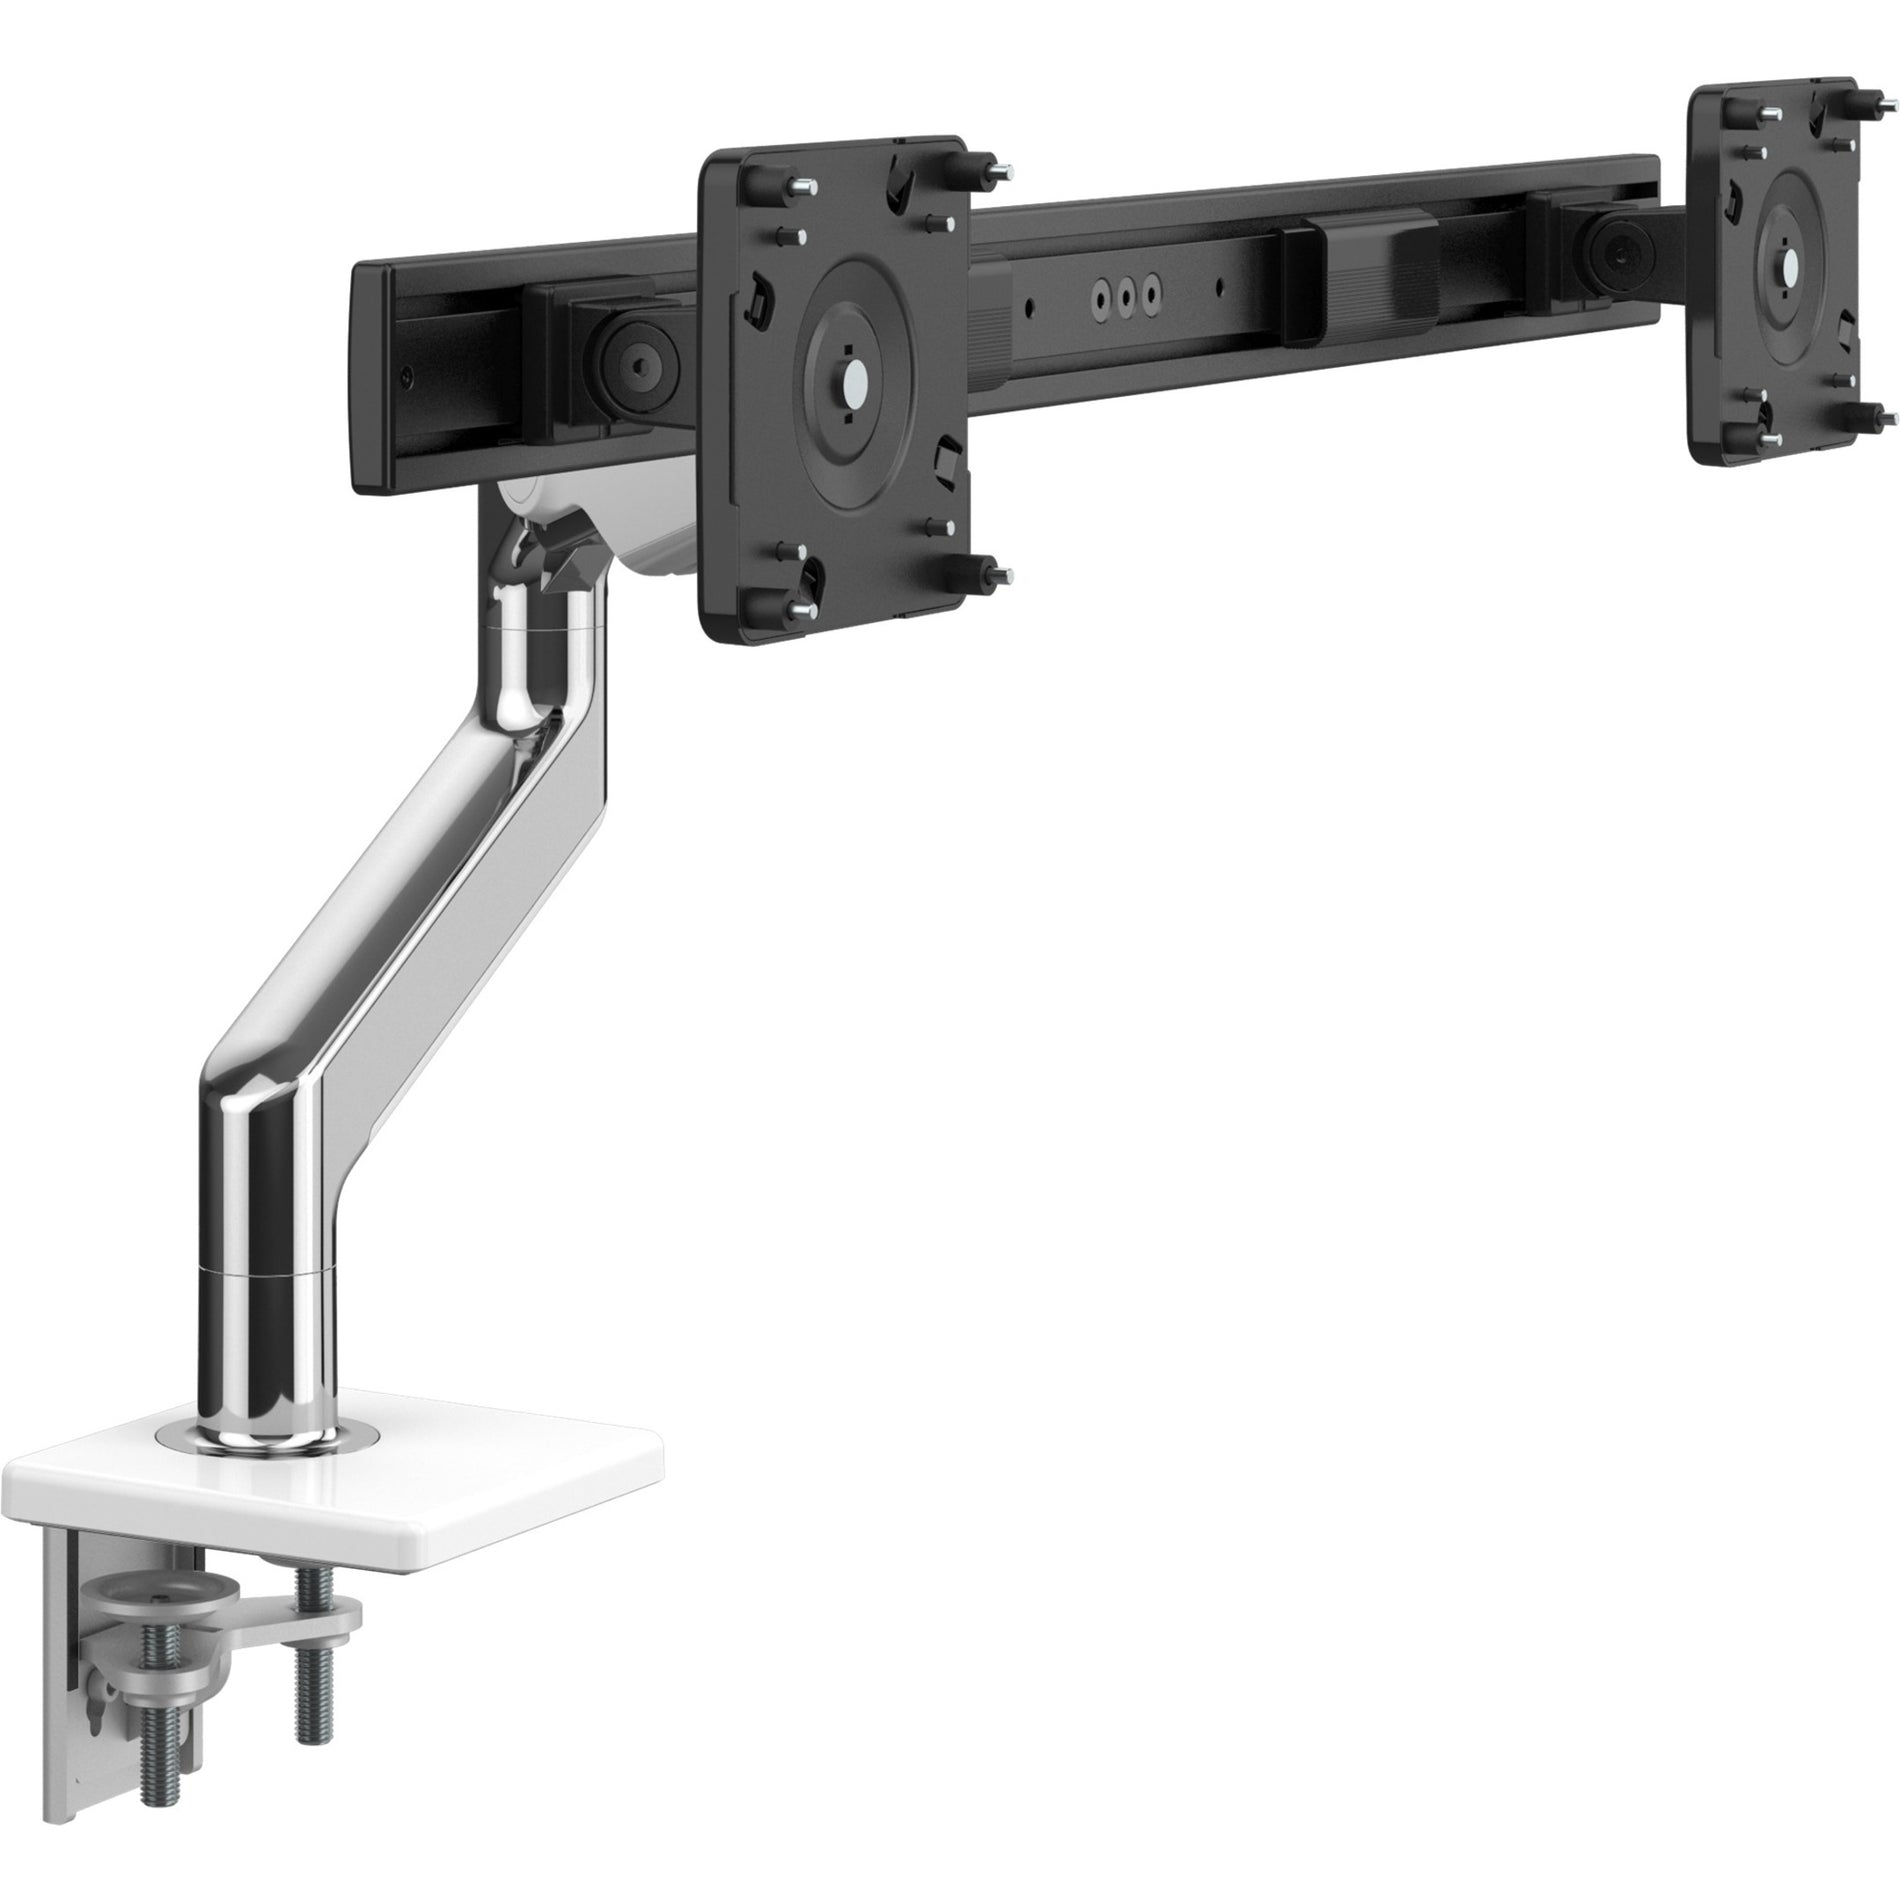 Humanscale M81CMWB2B M8.1 Monitor Arm, Cable Management, Rotate, Quick Release Mechanism, Durable, Robust, Angled/Dynamic Link